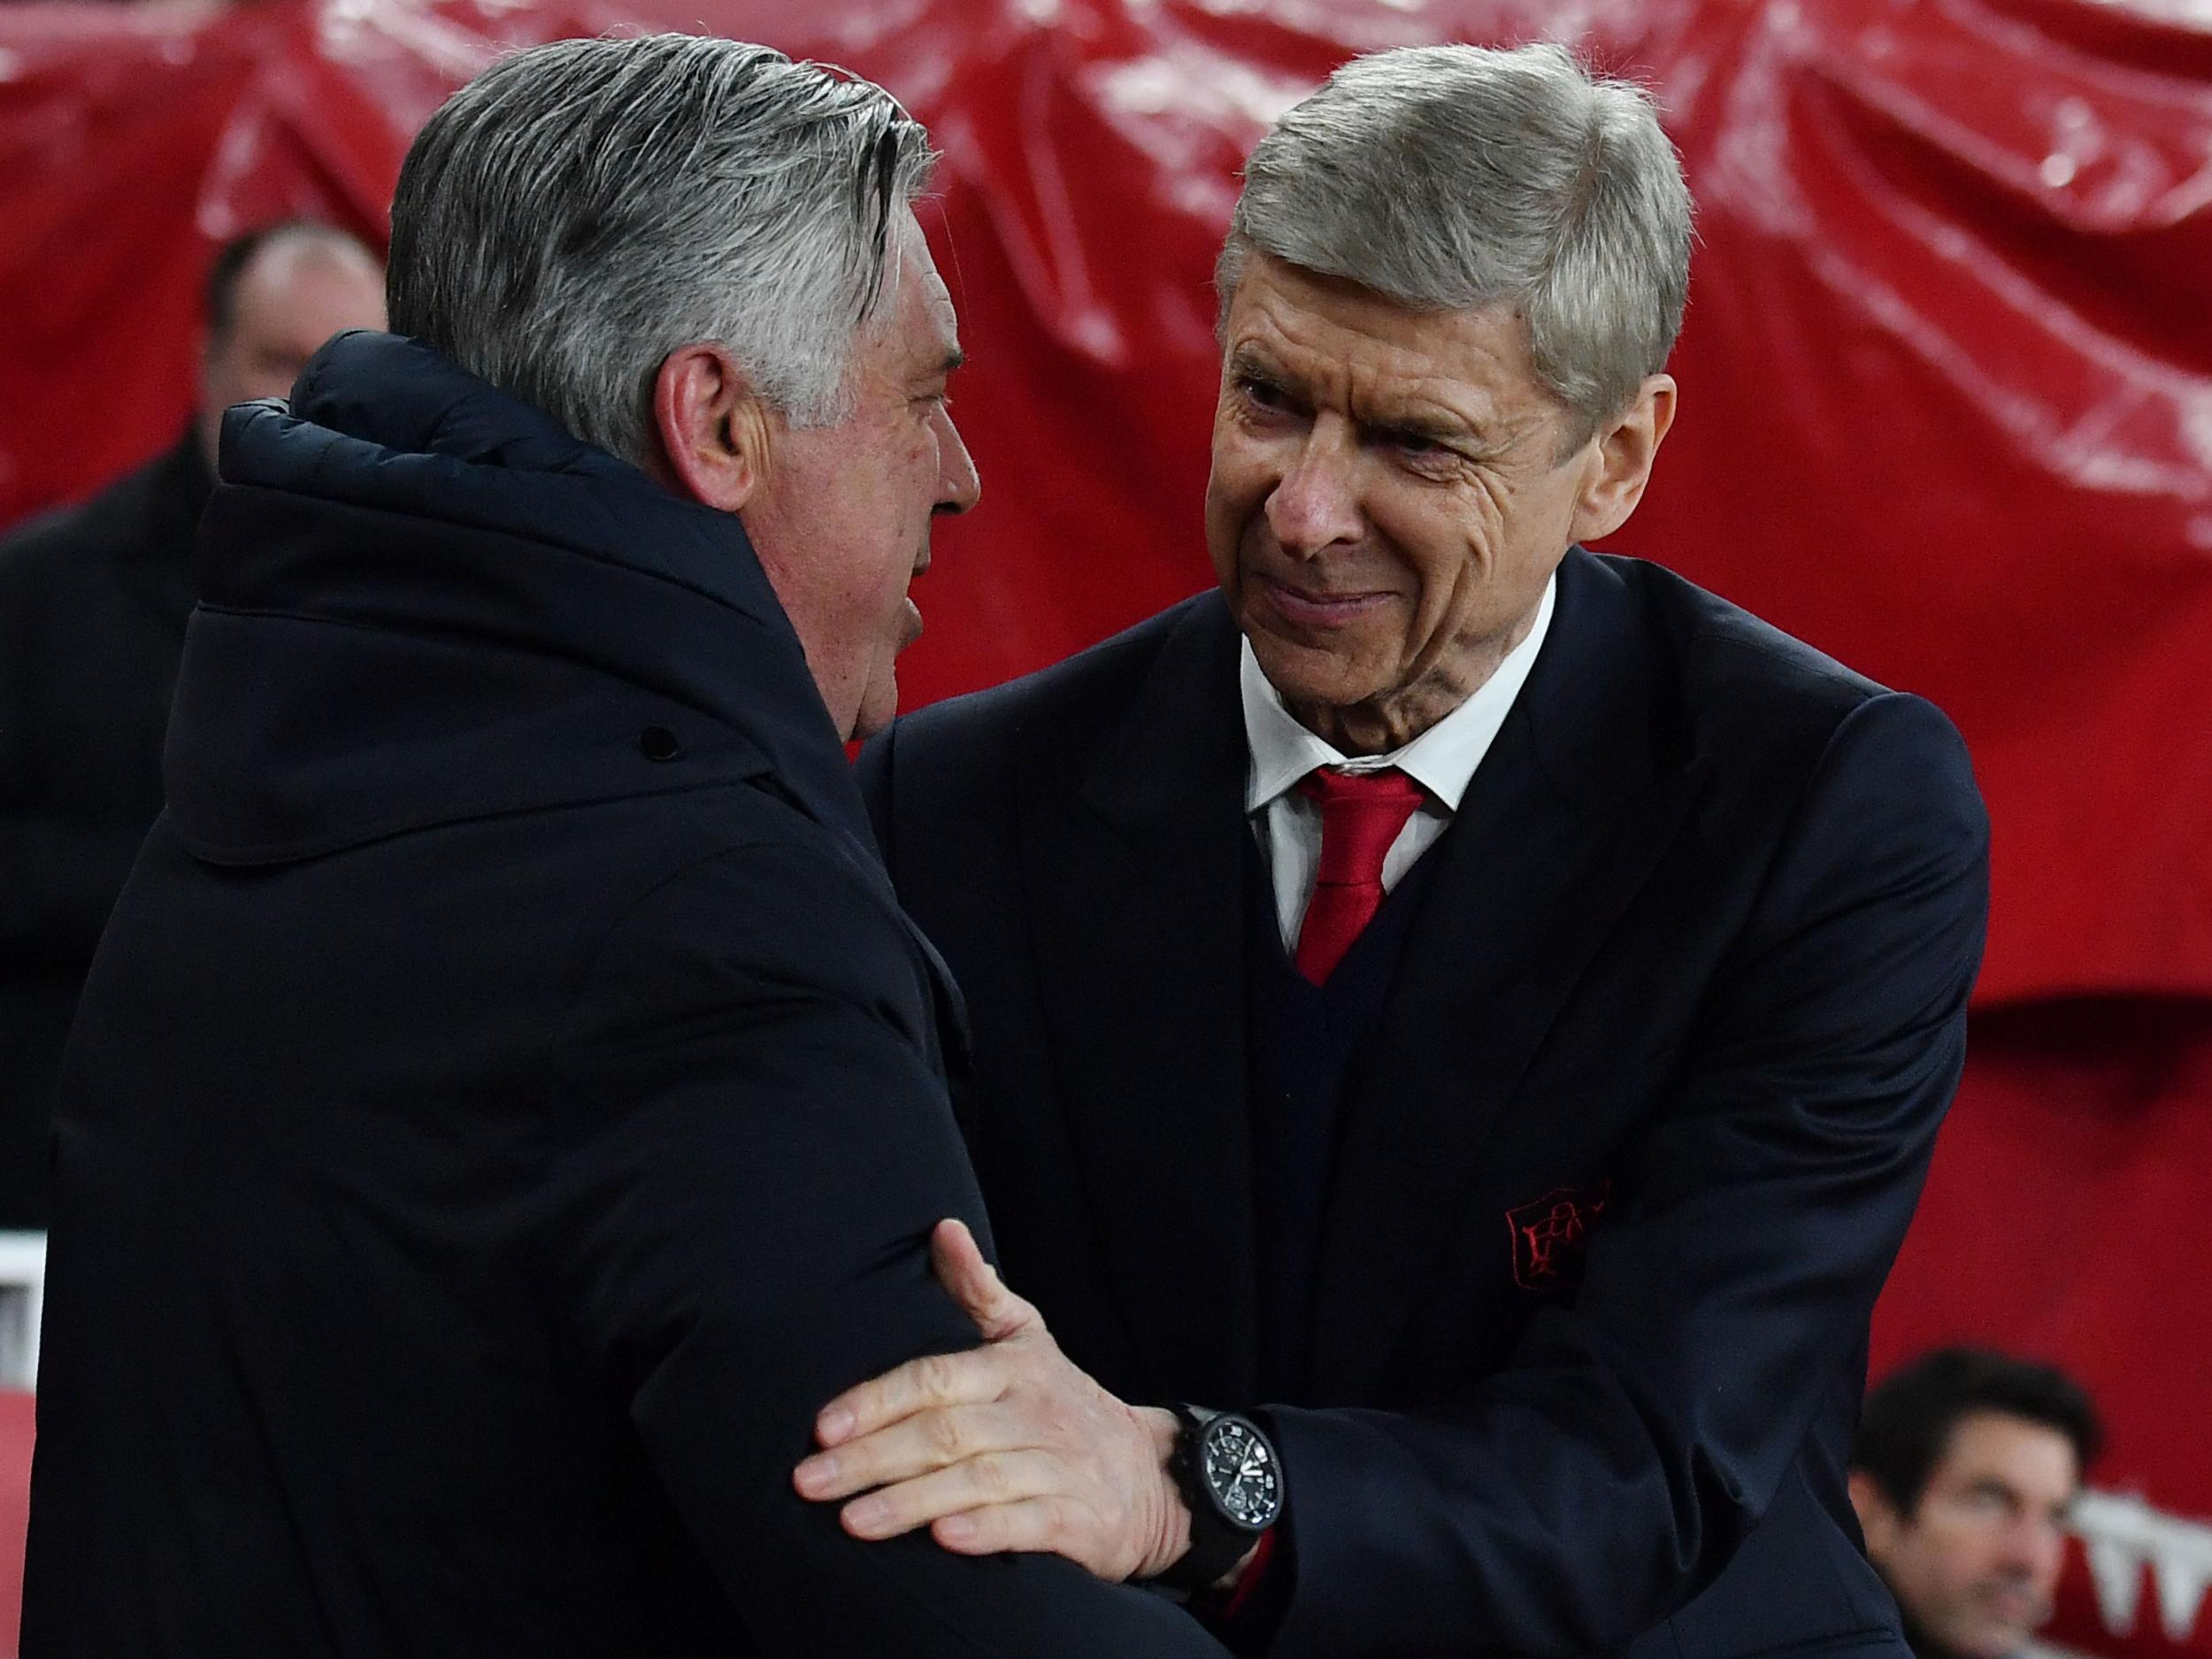 Ancelotti insisted Wenger could handle the pressure